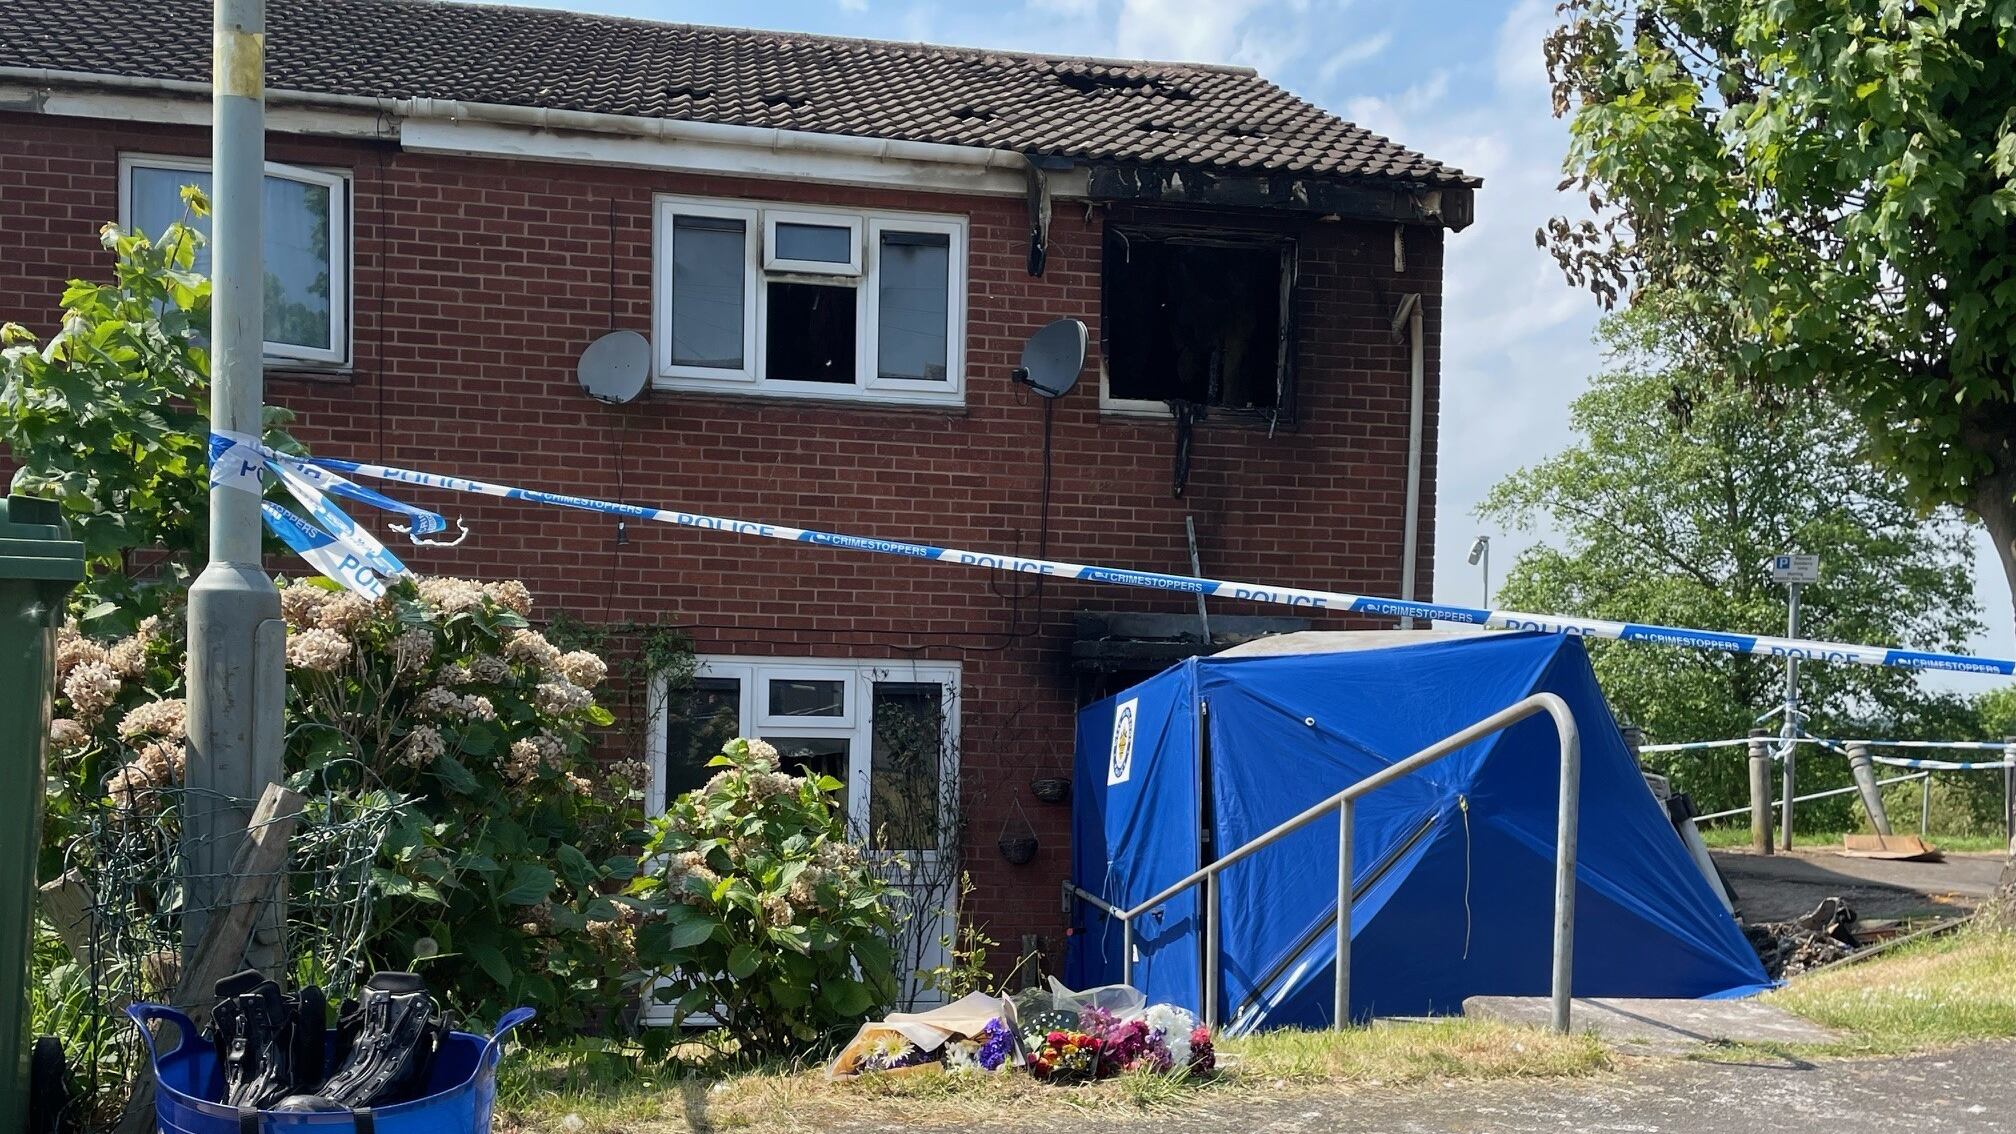 The scene in Dunstall Hill, Dunstall Park, Wolverhampton, after two women were killed in a fire